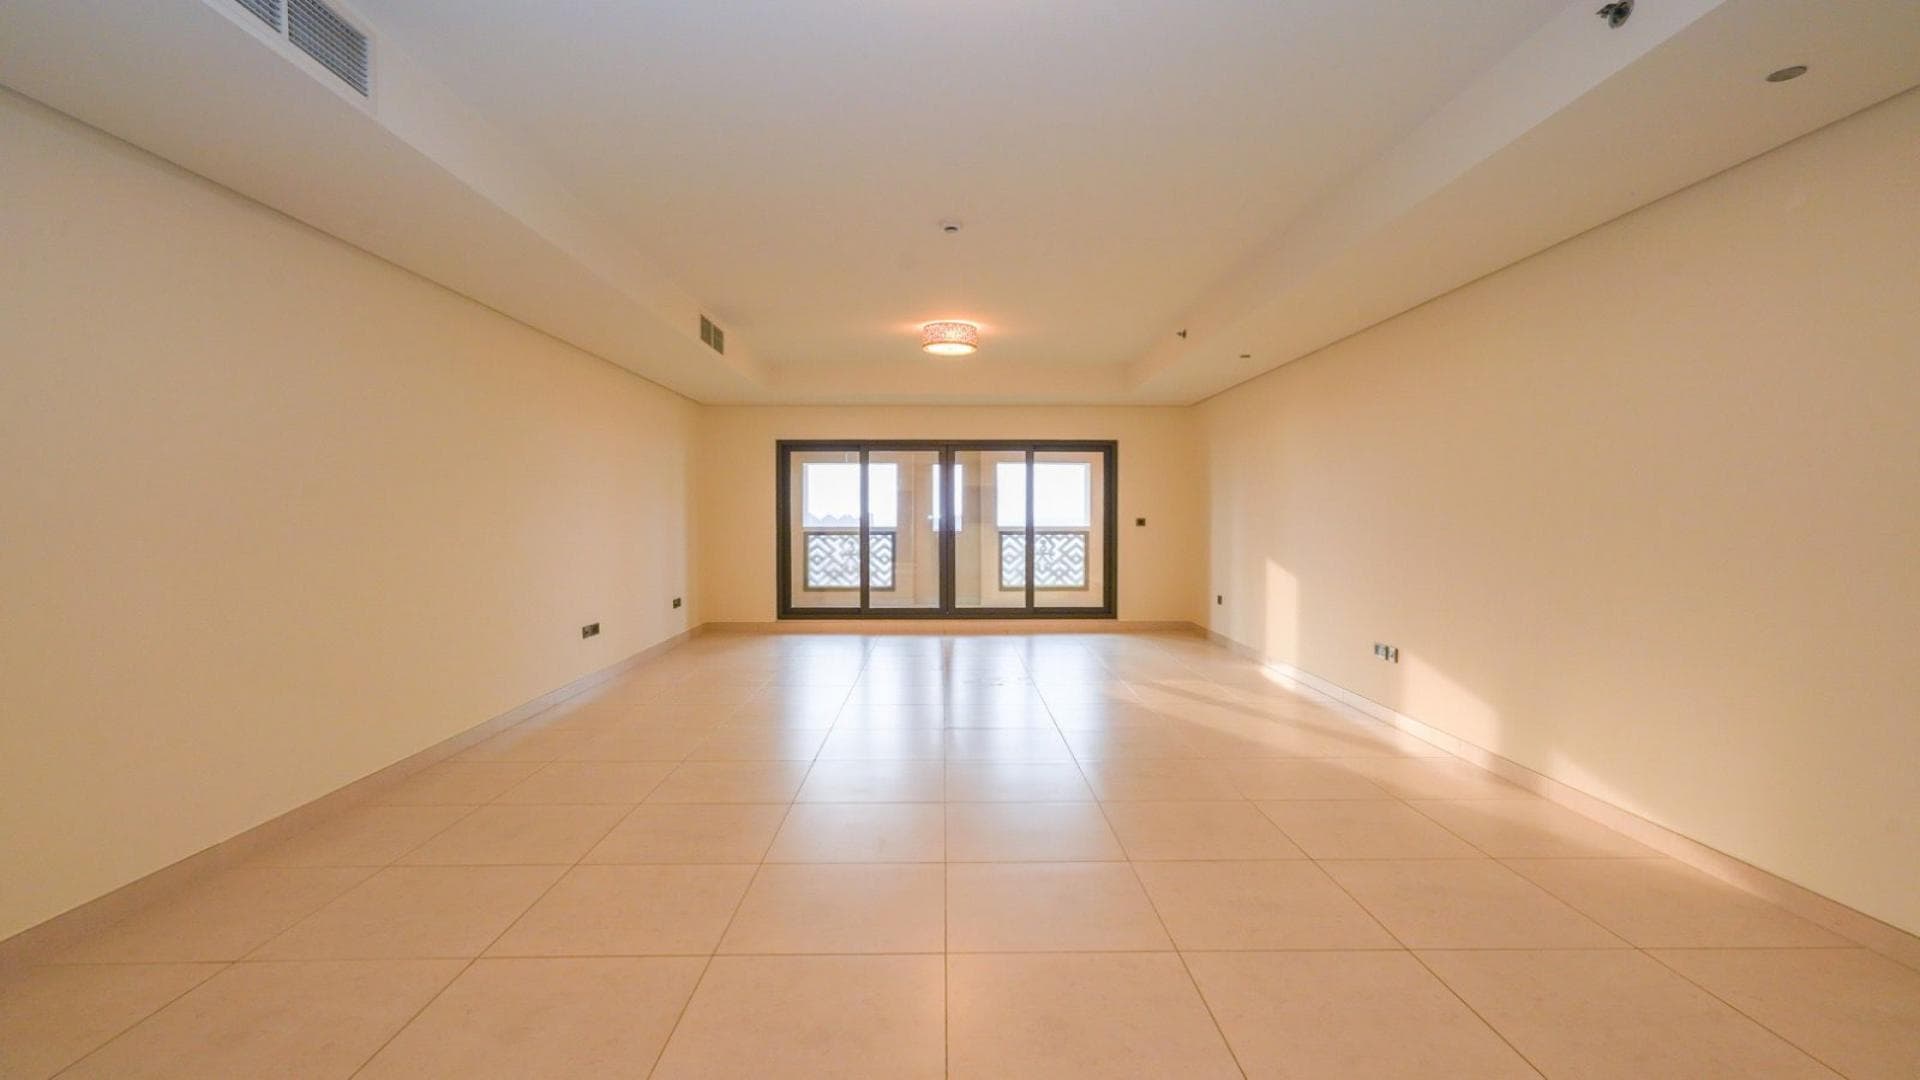 3 Bedroom Apartment For Sale Grand Residence Lp38241 11d9836bd960a900.jpeg